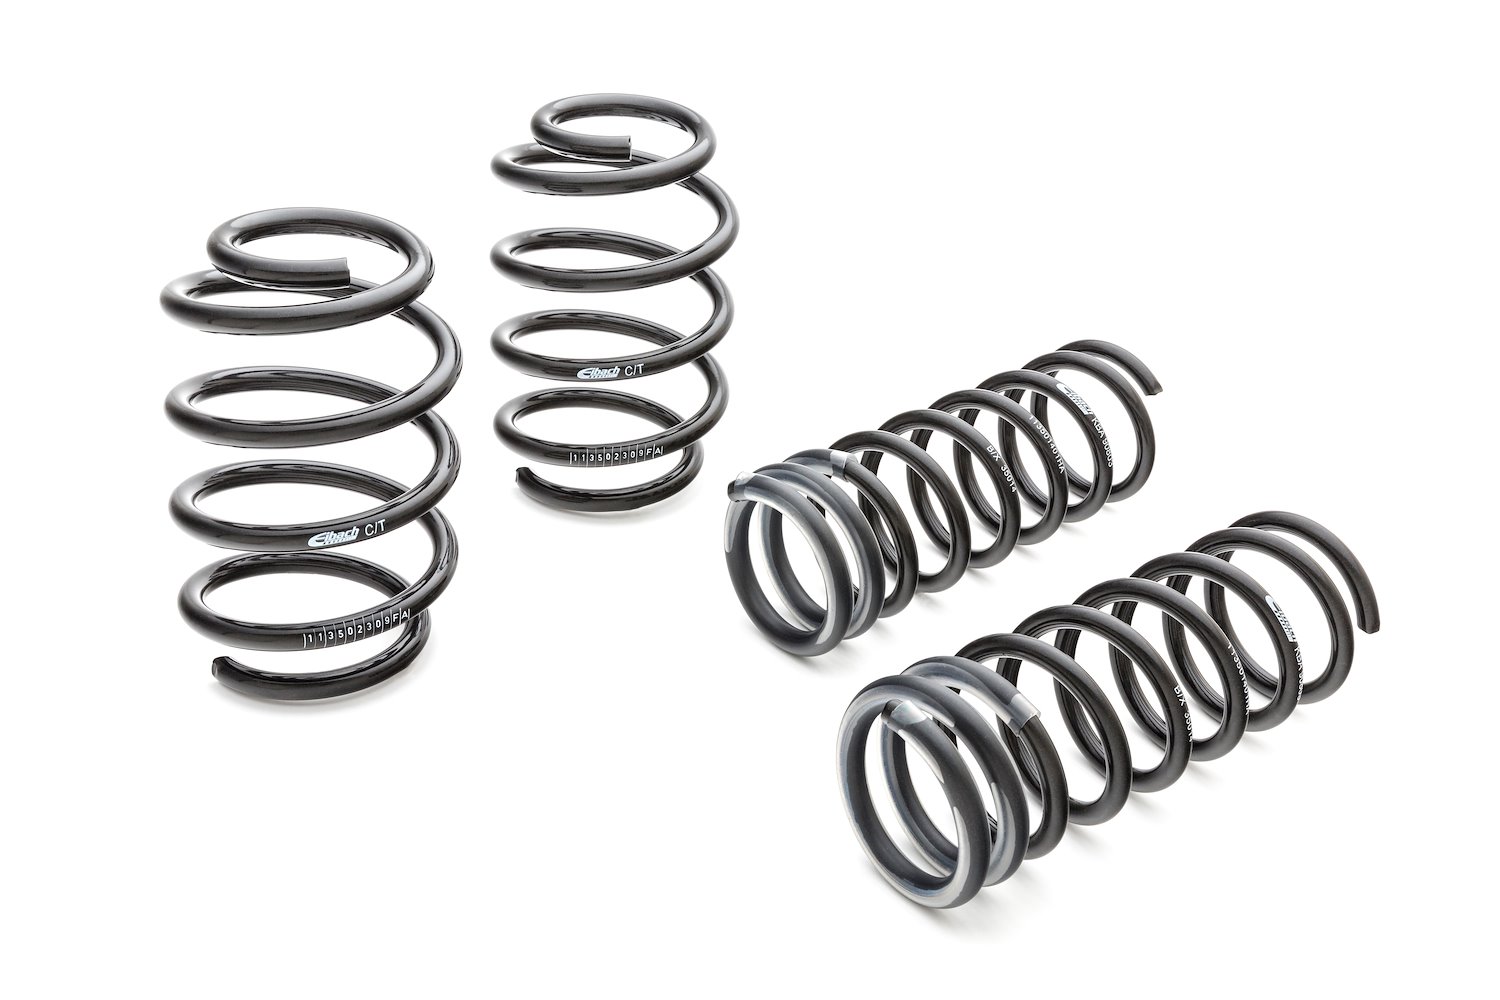 1584.140 Pro-Kit Lowering Springs 2002-2005 A4 Avant (wagon) Quattro 4-cyl - 1.200 in. Front/Rear Drop